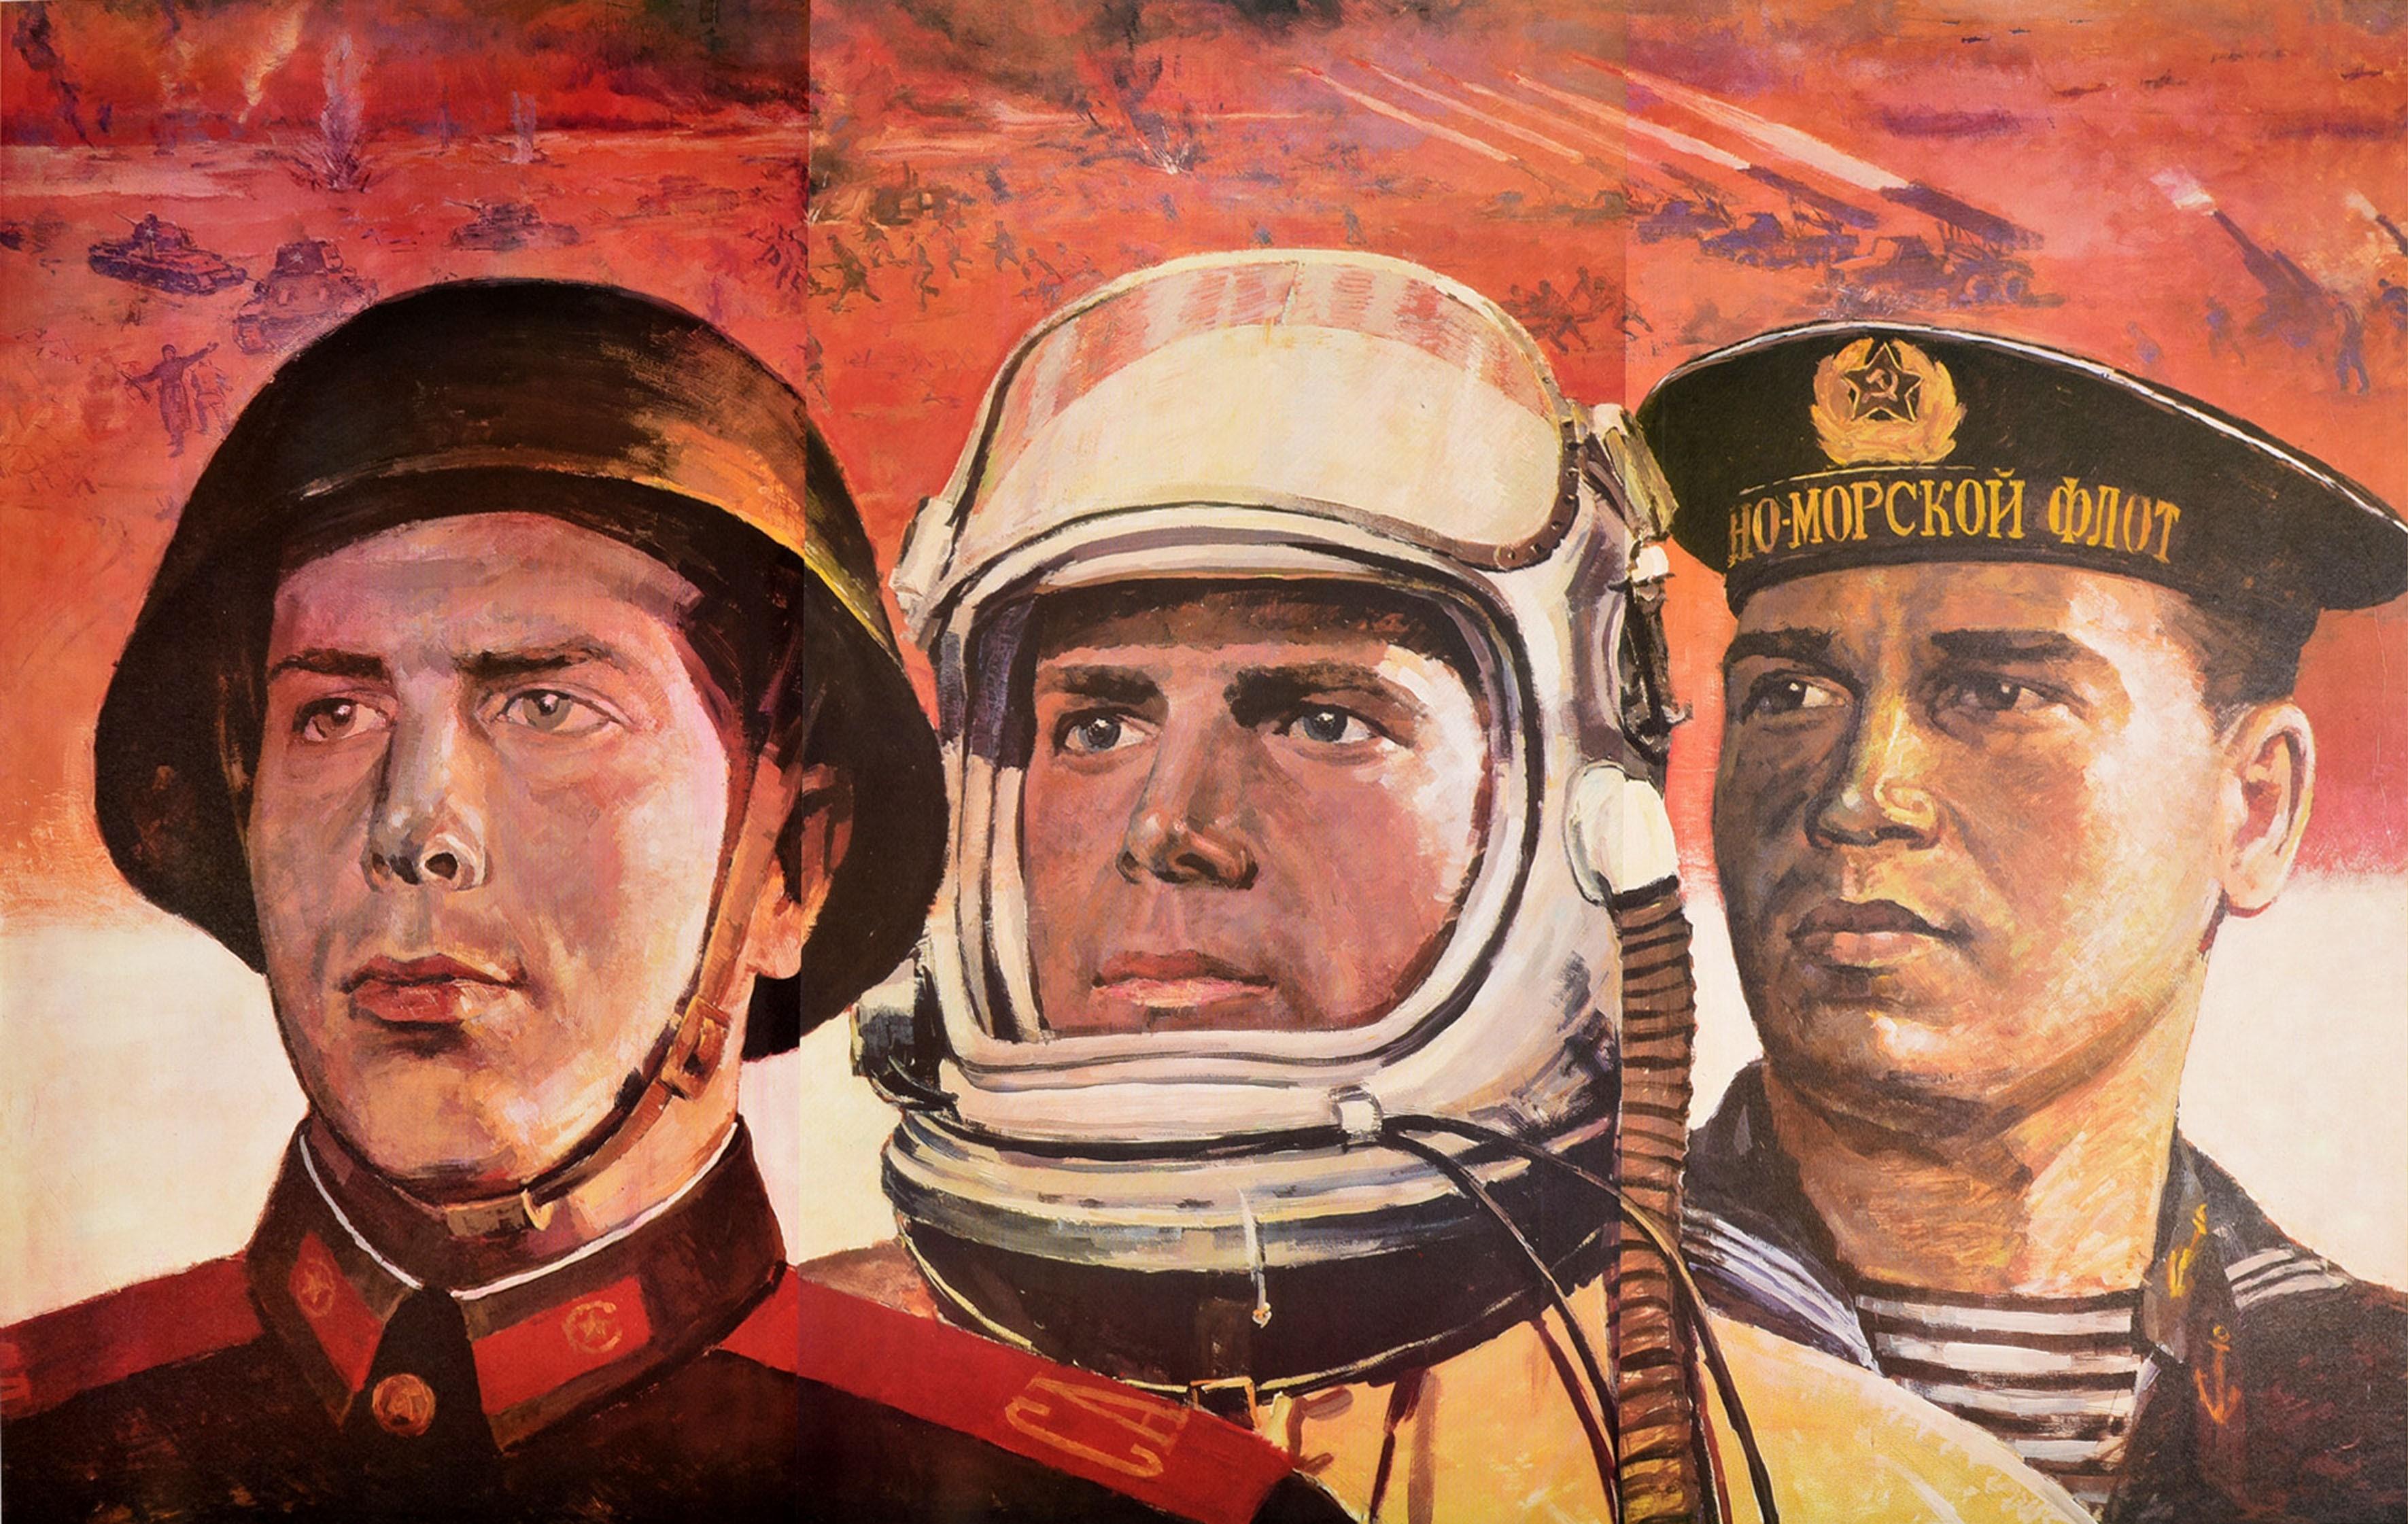 Original large size vintage Soviet propaganda poster - Glory to the heroic Armed Forces of the USSR! - featuring dynamic artwork of a soldier, pilot and sailor in uniform of the Red Army and the Soviet Navy and Air Force with smaller illustrations